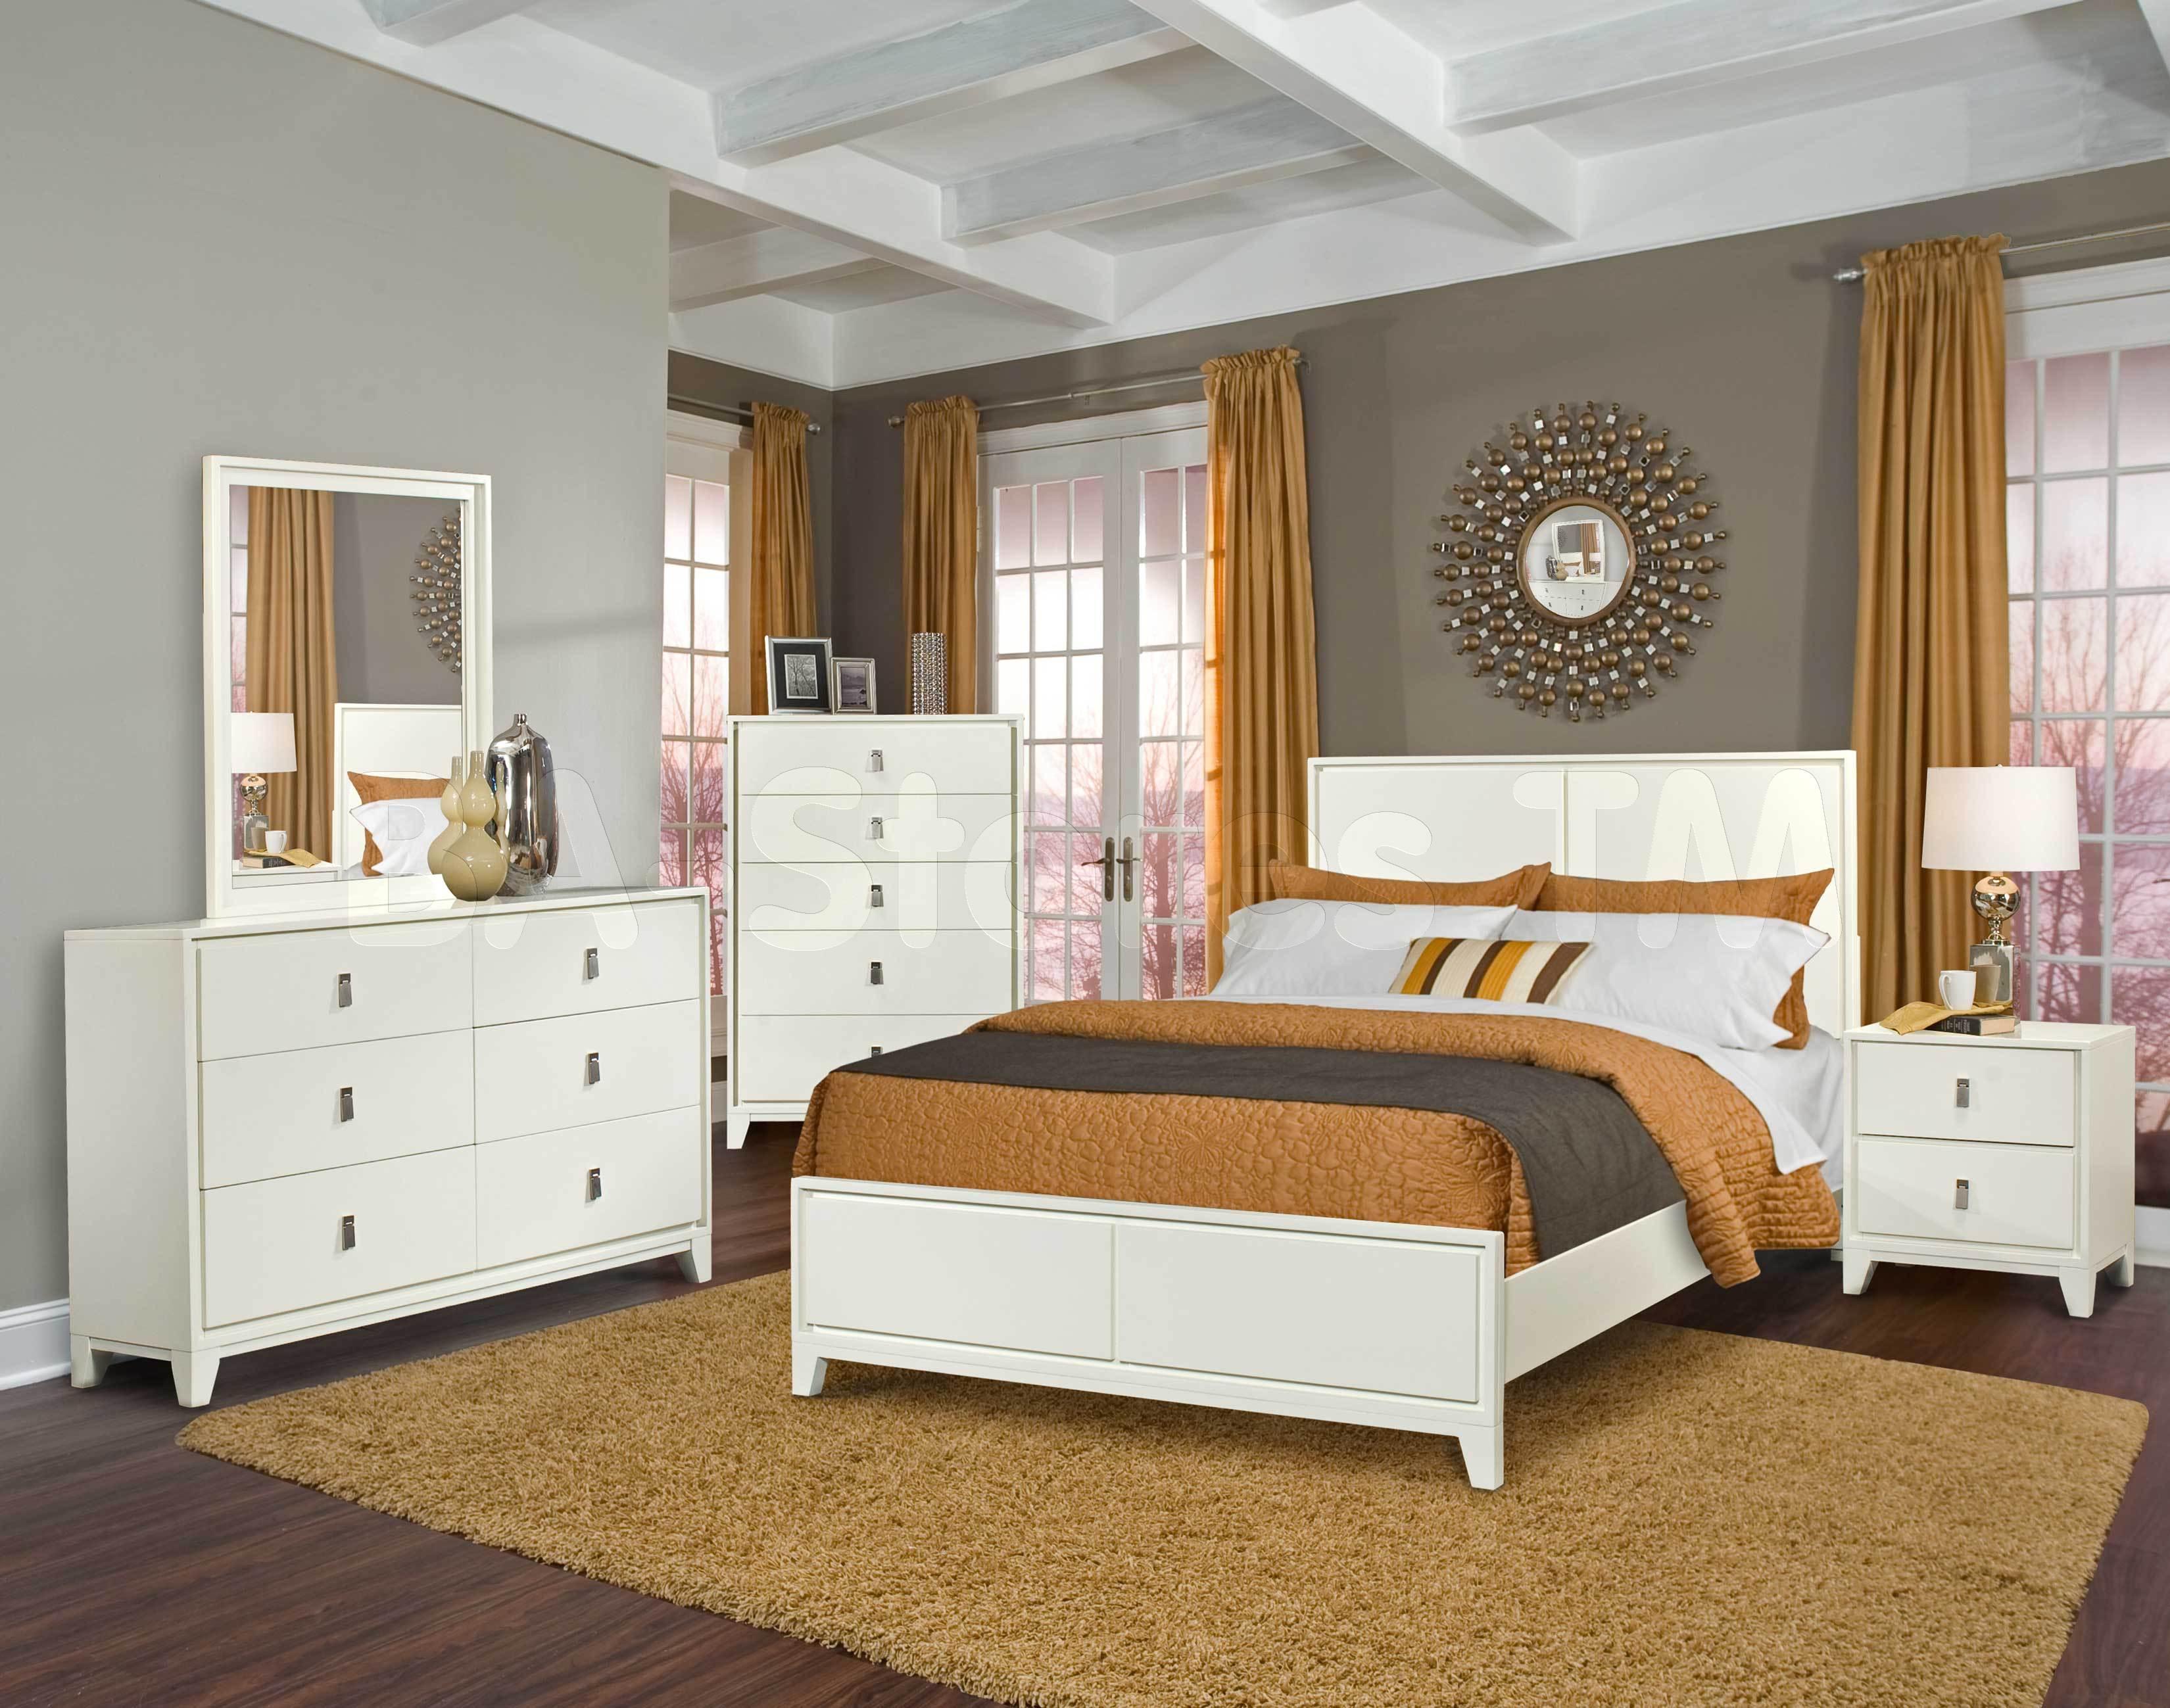 17 Timeless Bedroom Designs With Wooden, Bedroom Ideas With Wooden Furniture